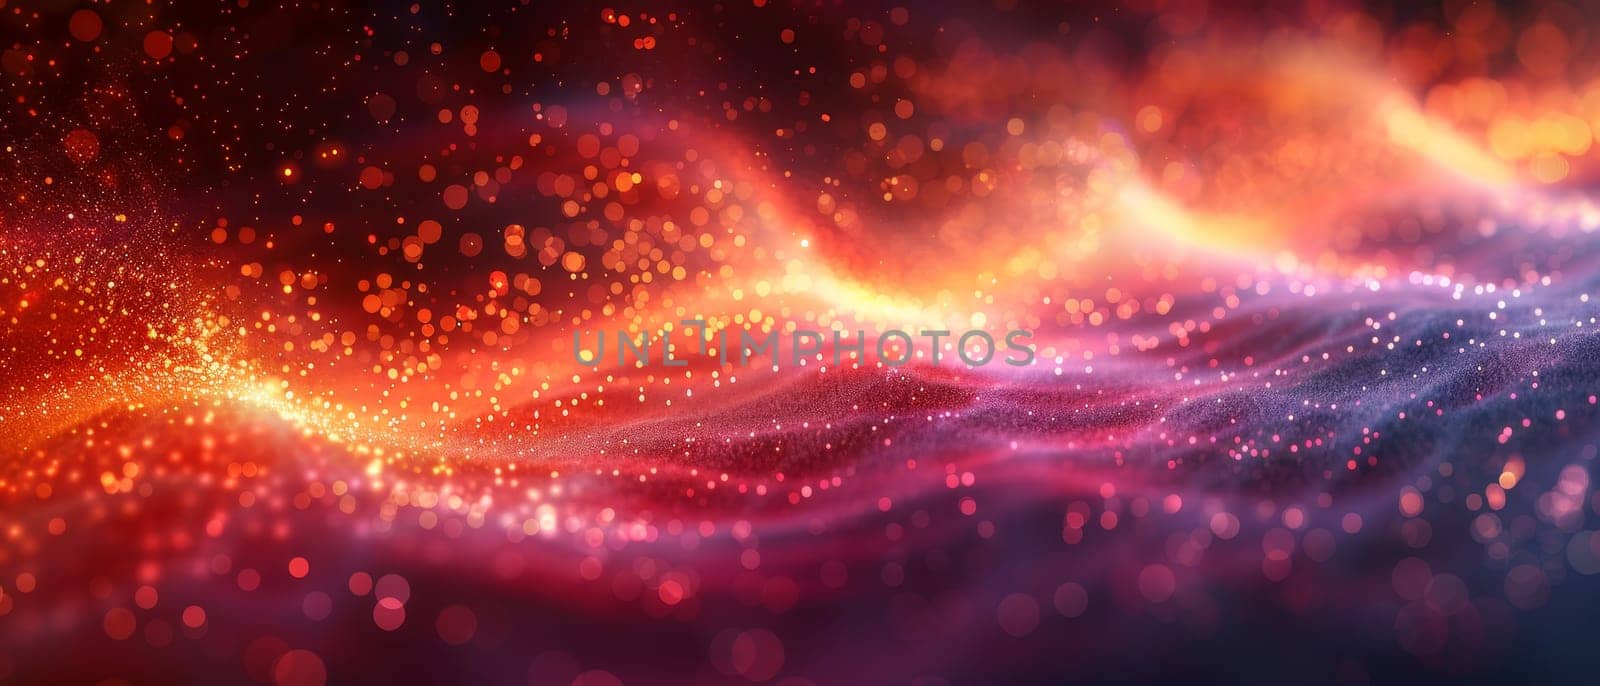 A colorful, swirling pattern of glittery particles by AI generated image.